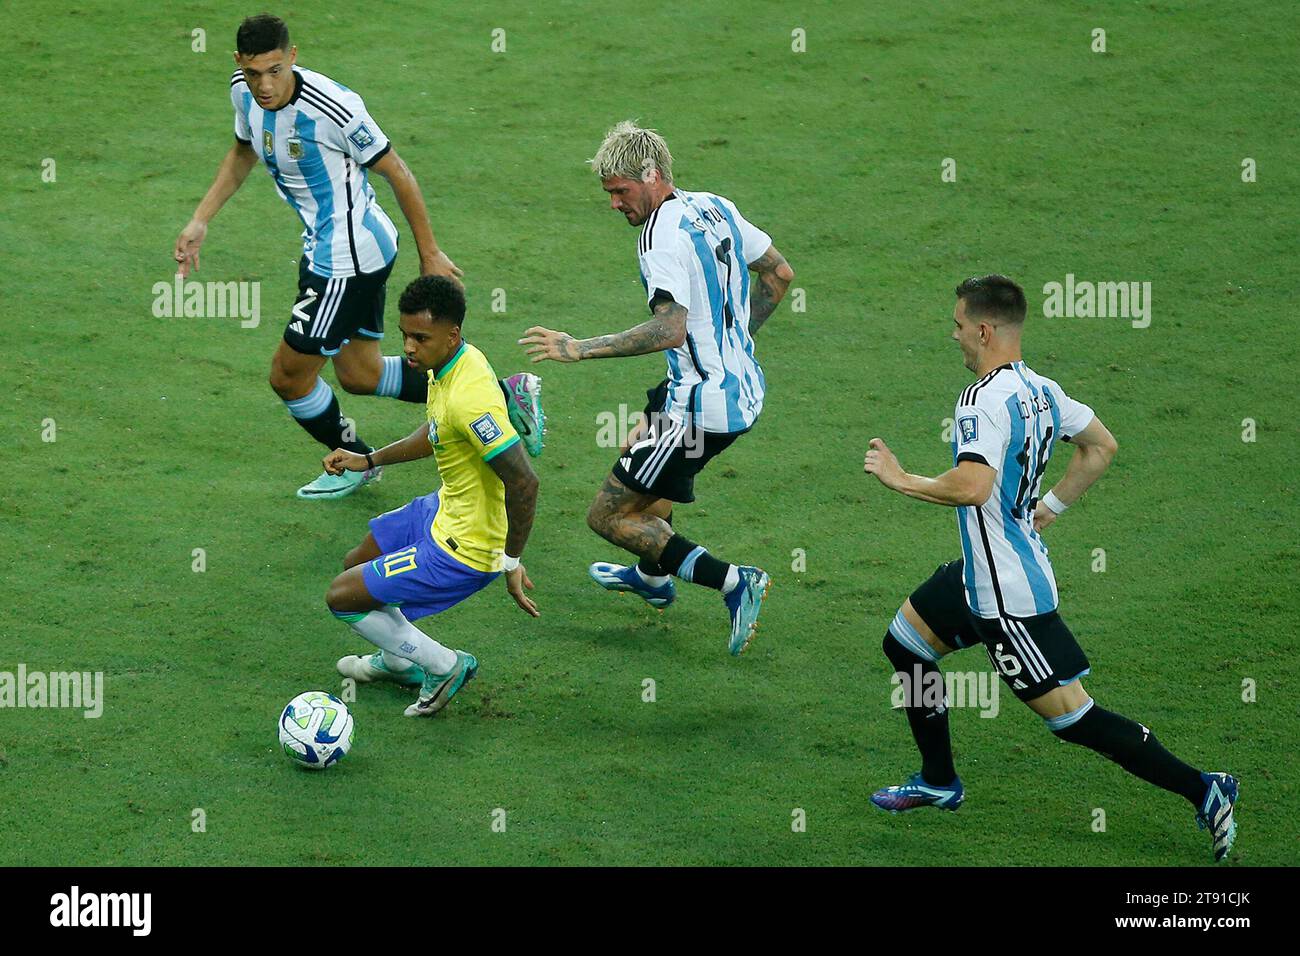 Rio de Janeiro, Brazil. 21st Nov, 2023. Rodrygo of Brazil battles for possession ball with Rodrigo De Paul, Nahuel Molina, Giovani Lo Celso of Argentina, during the match between Brazil and Argentina for the 4st leg of FIFA 2026 Qualifiers, at Maracana Stadium, in Rio de Janeiro, Brazil on November1. Photo: Satiro Sodré/DiaEsportivo/Alamy Live News Credit: DiaEsportivo/Alamy Live News Stock Photo